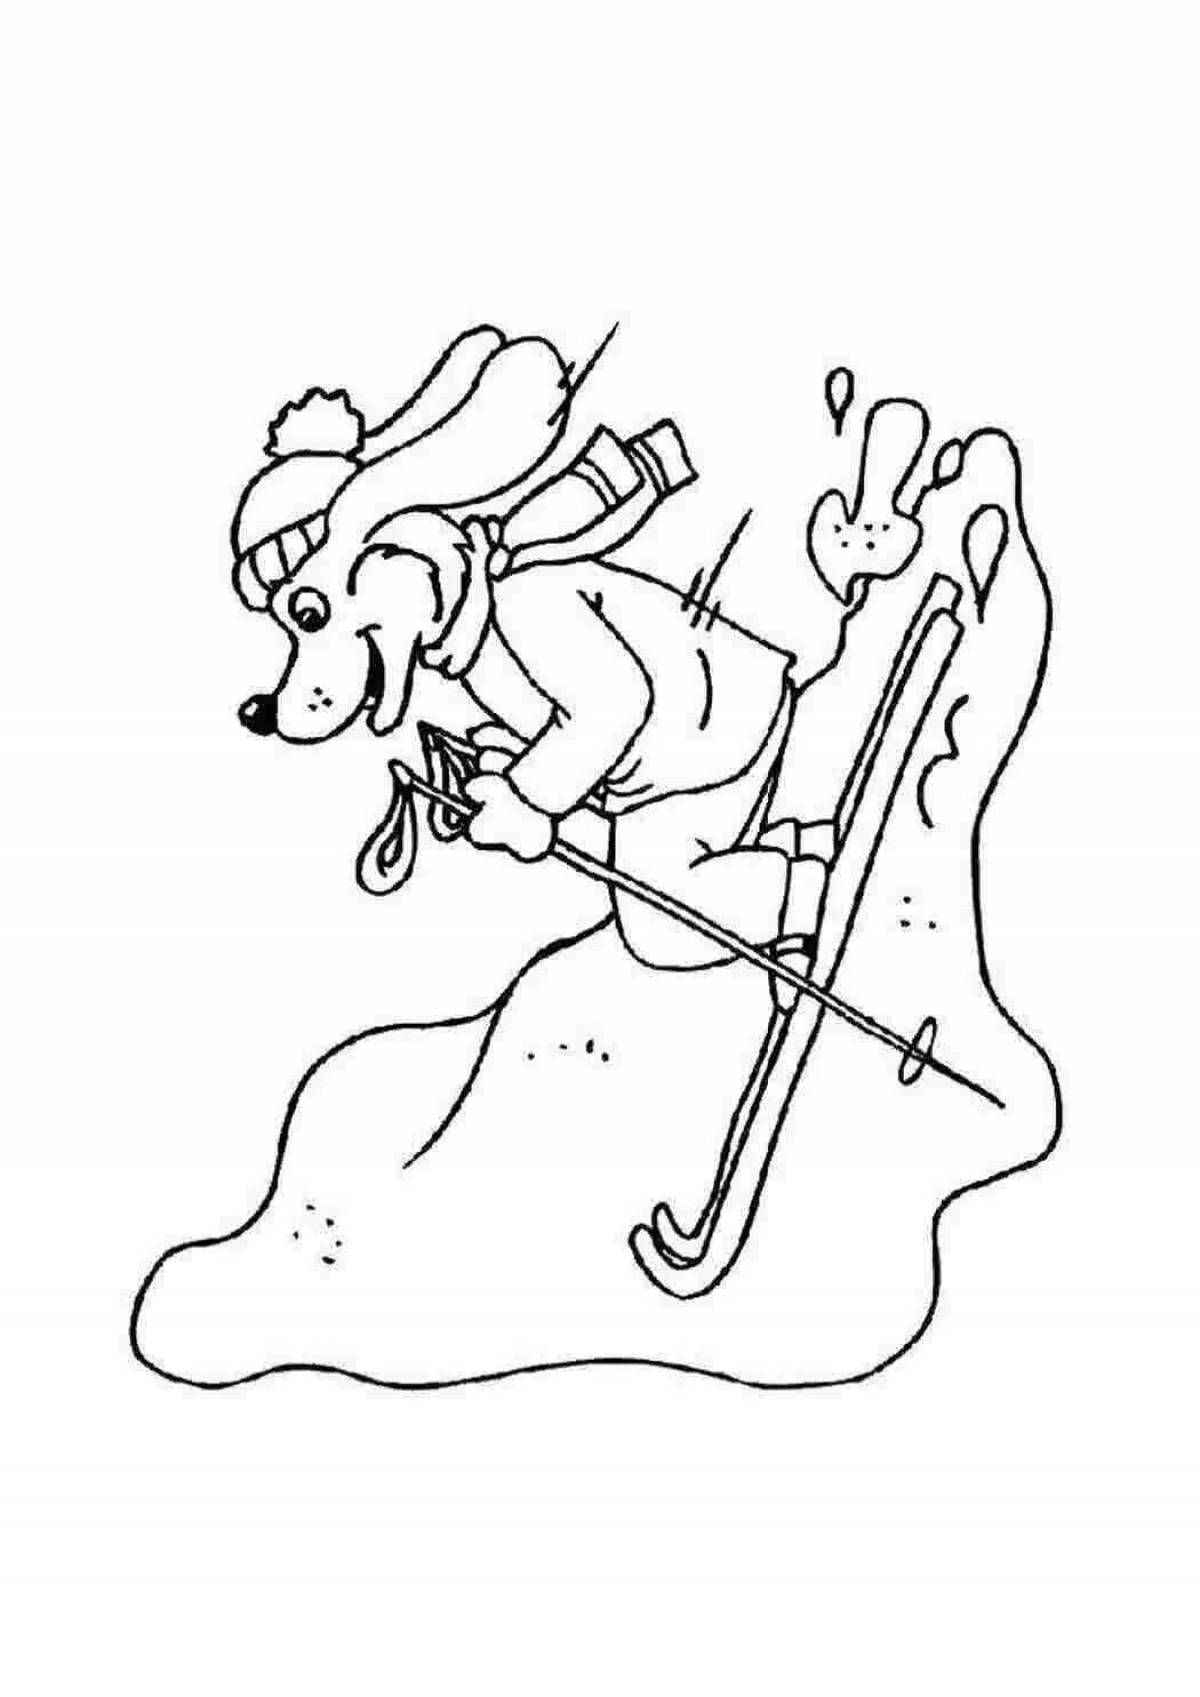 Animated family skiing coloring page